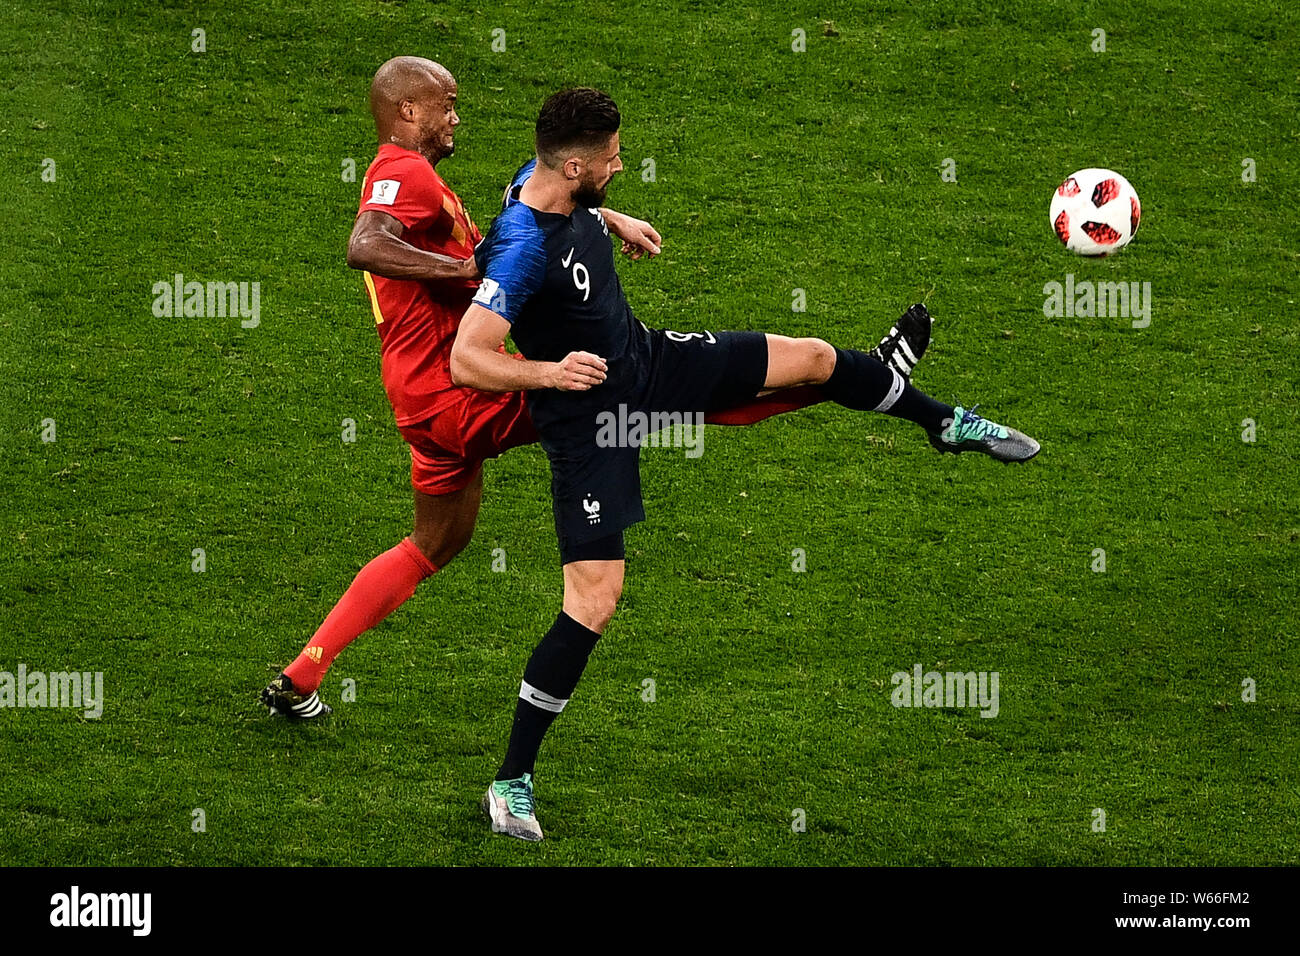 Olivier Giroud of France, front, challenges Vincent Kompany of Belgium in their semifinal match during the 2018 FIFA World Cup in Saint Petersburg, Ru Stock Photo